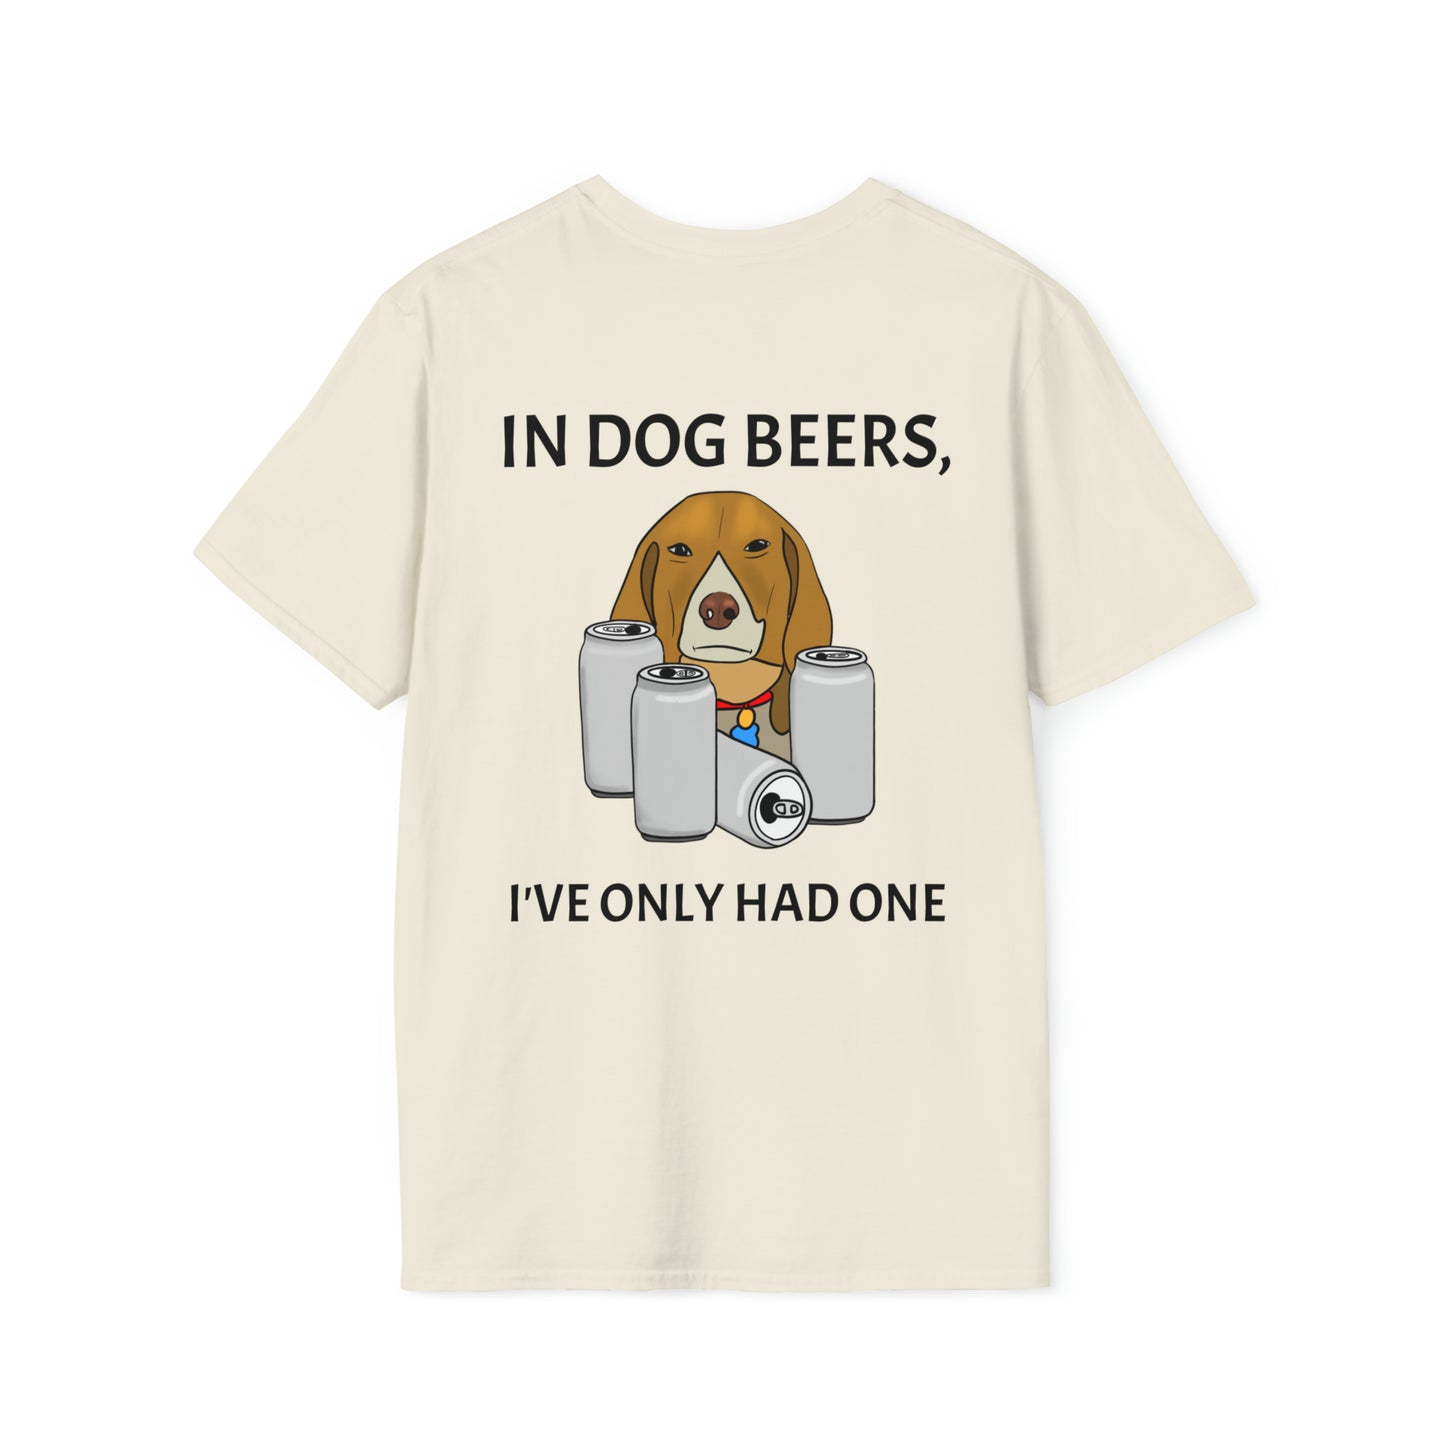 In Dog Beers, I've Only Had One (Version 2)